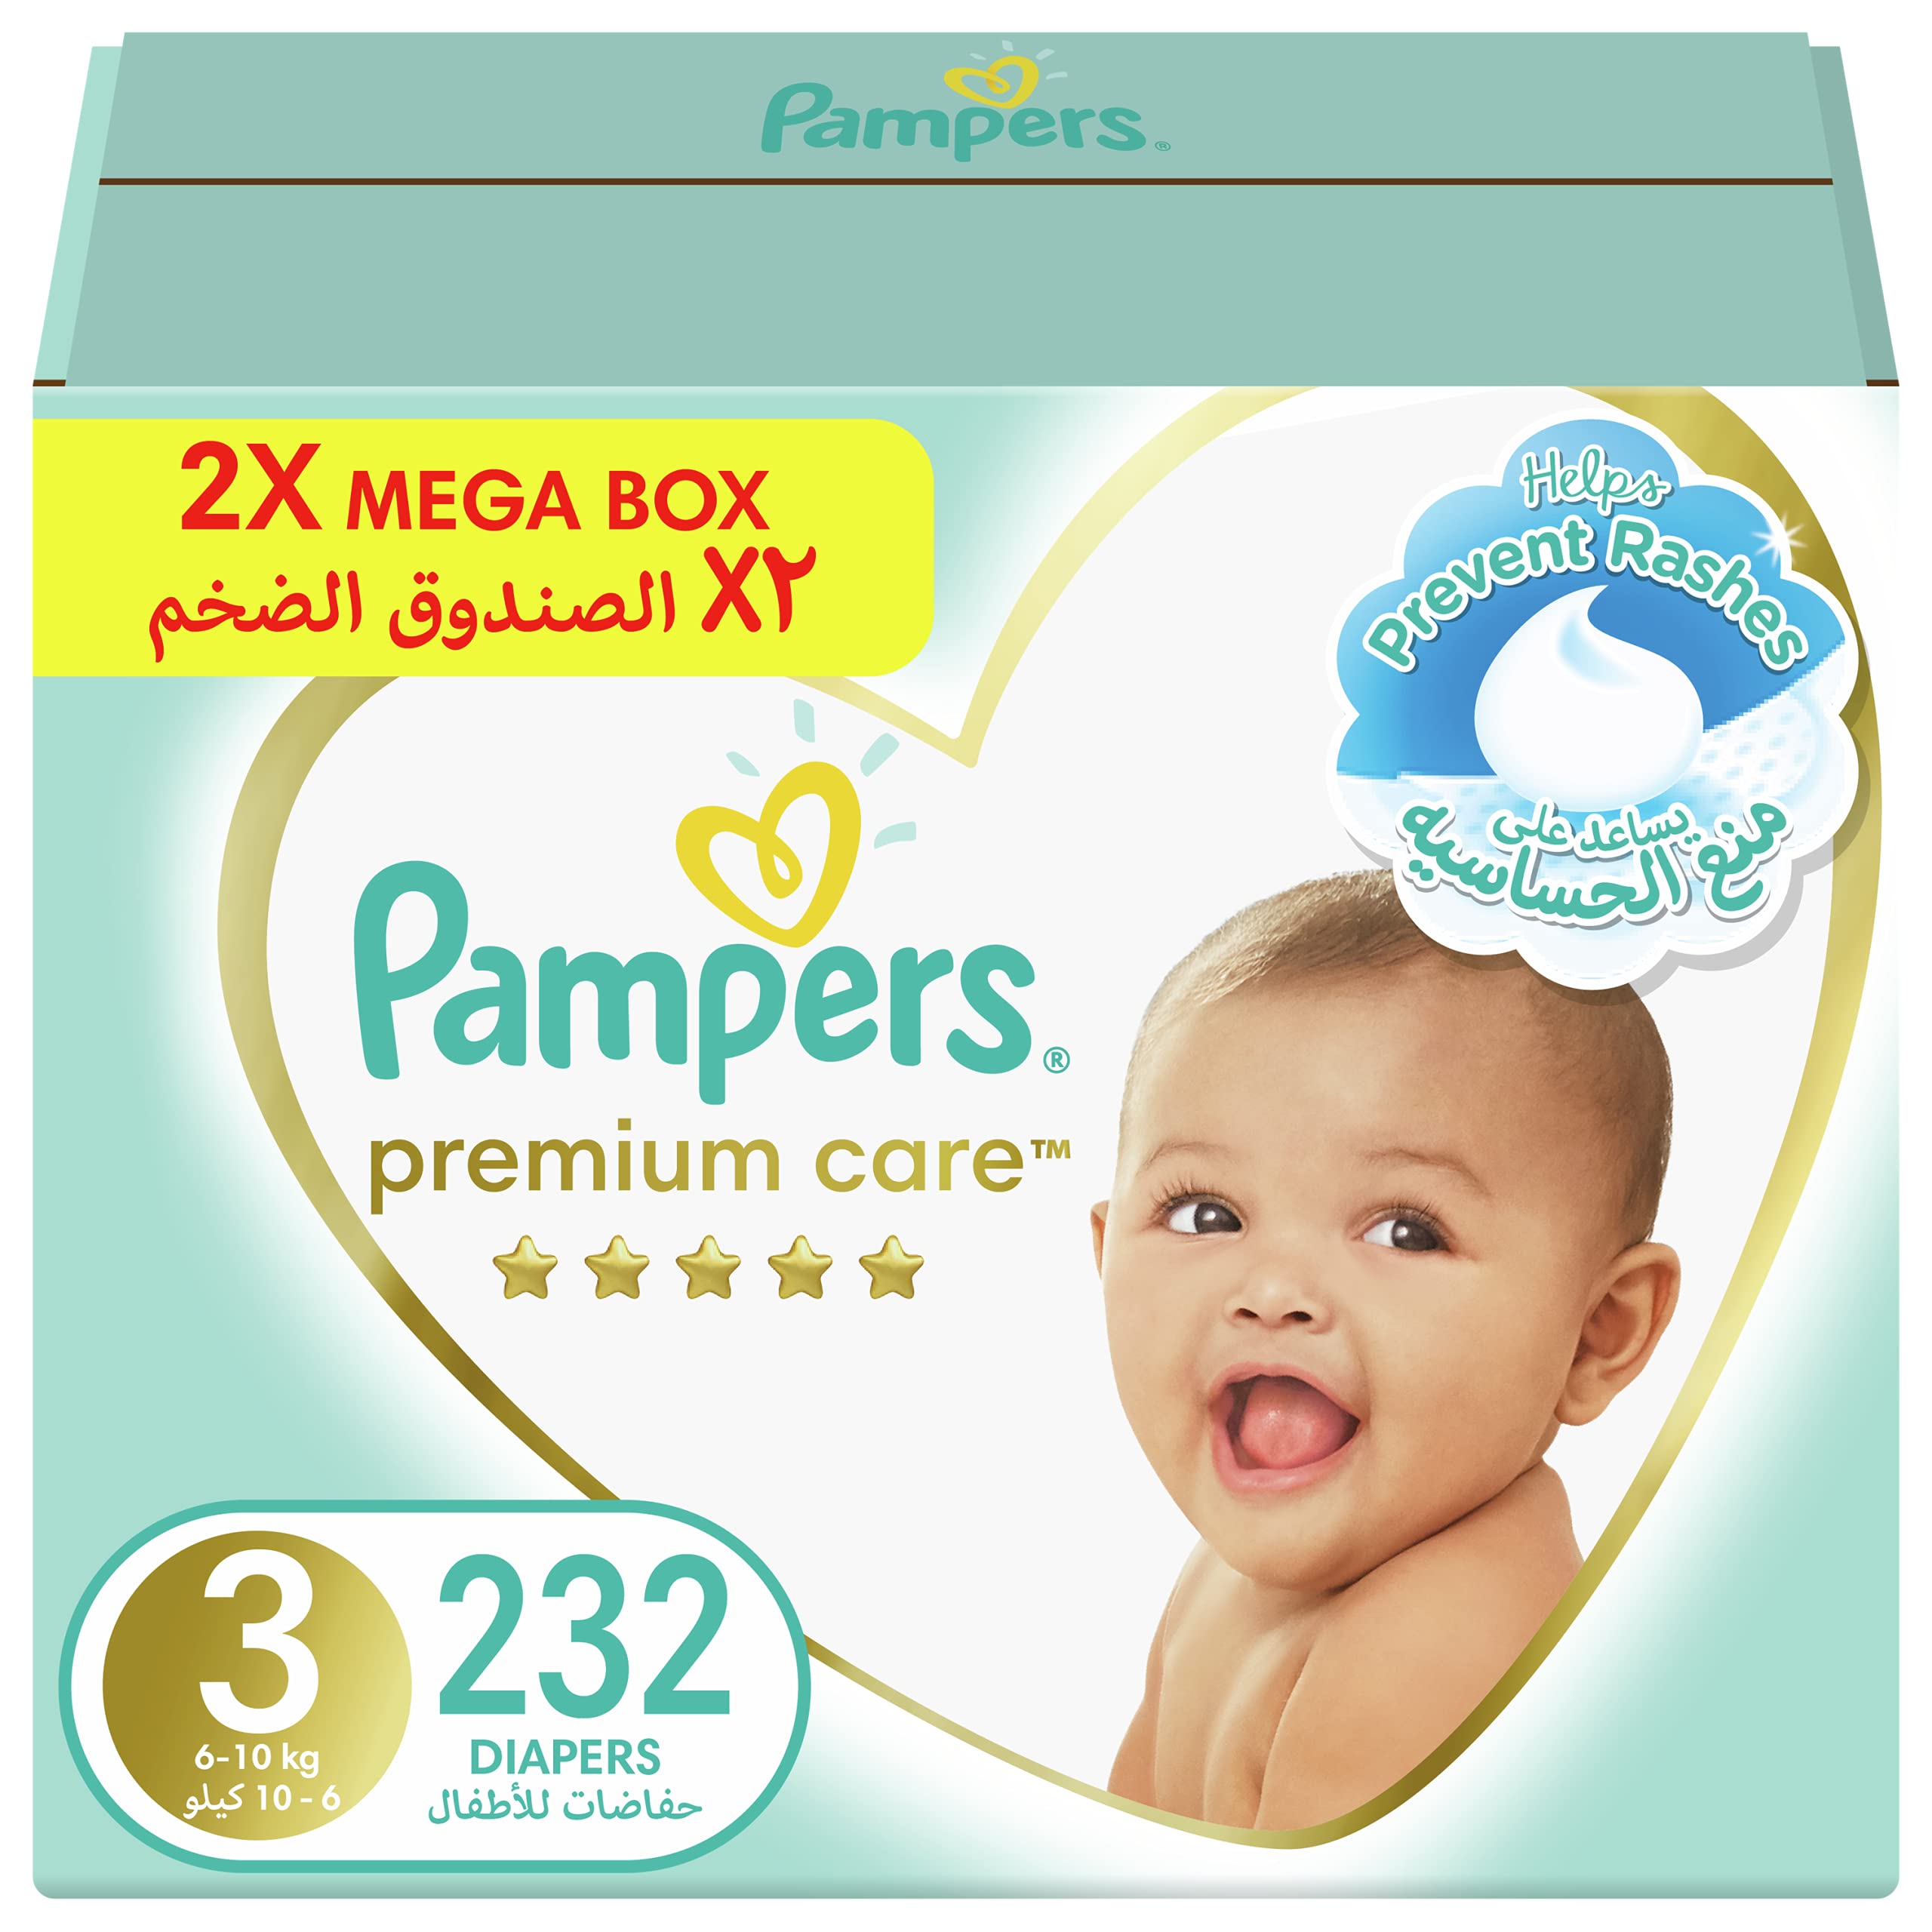 Pampers Premium Care Diapers, Size 3, 6-10 Kg, The Softest Diaper And The Best Skin Protection, 232 Baby Diapers حفاضات بامبرز عناية مميّزة، مقاس 3، وسط، 5-9 كلغ، صندوق ضخم مزدوج، 232 حفاض